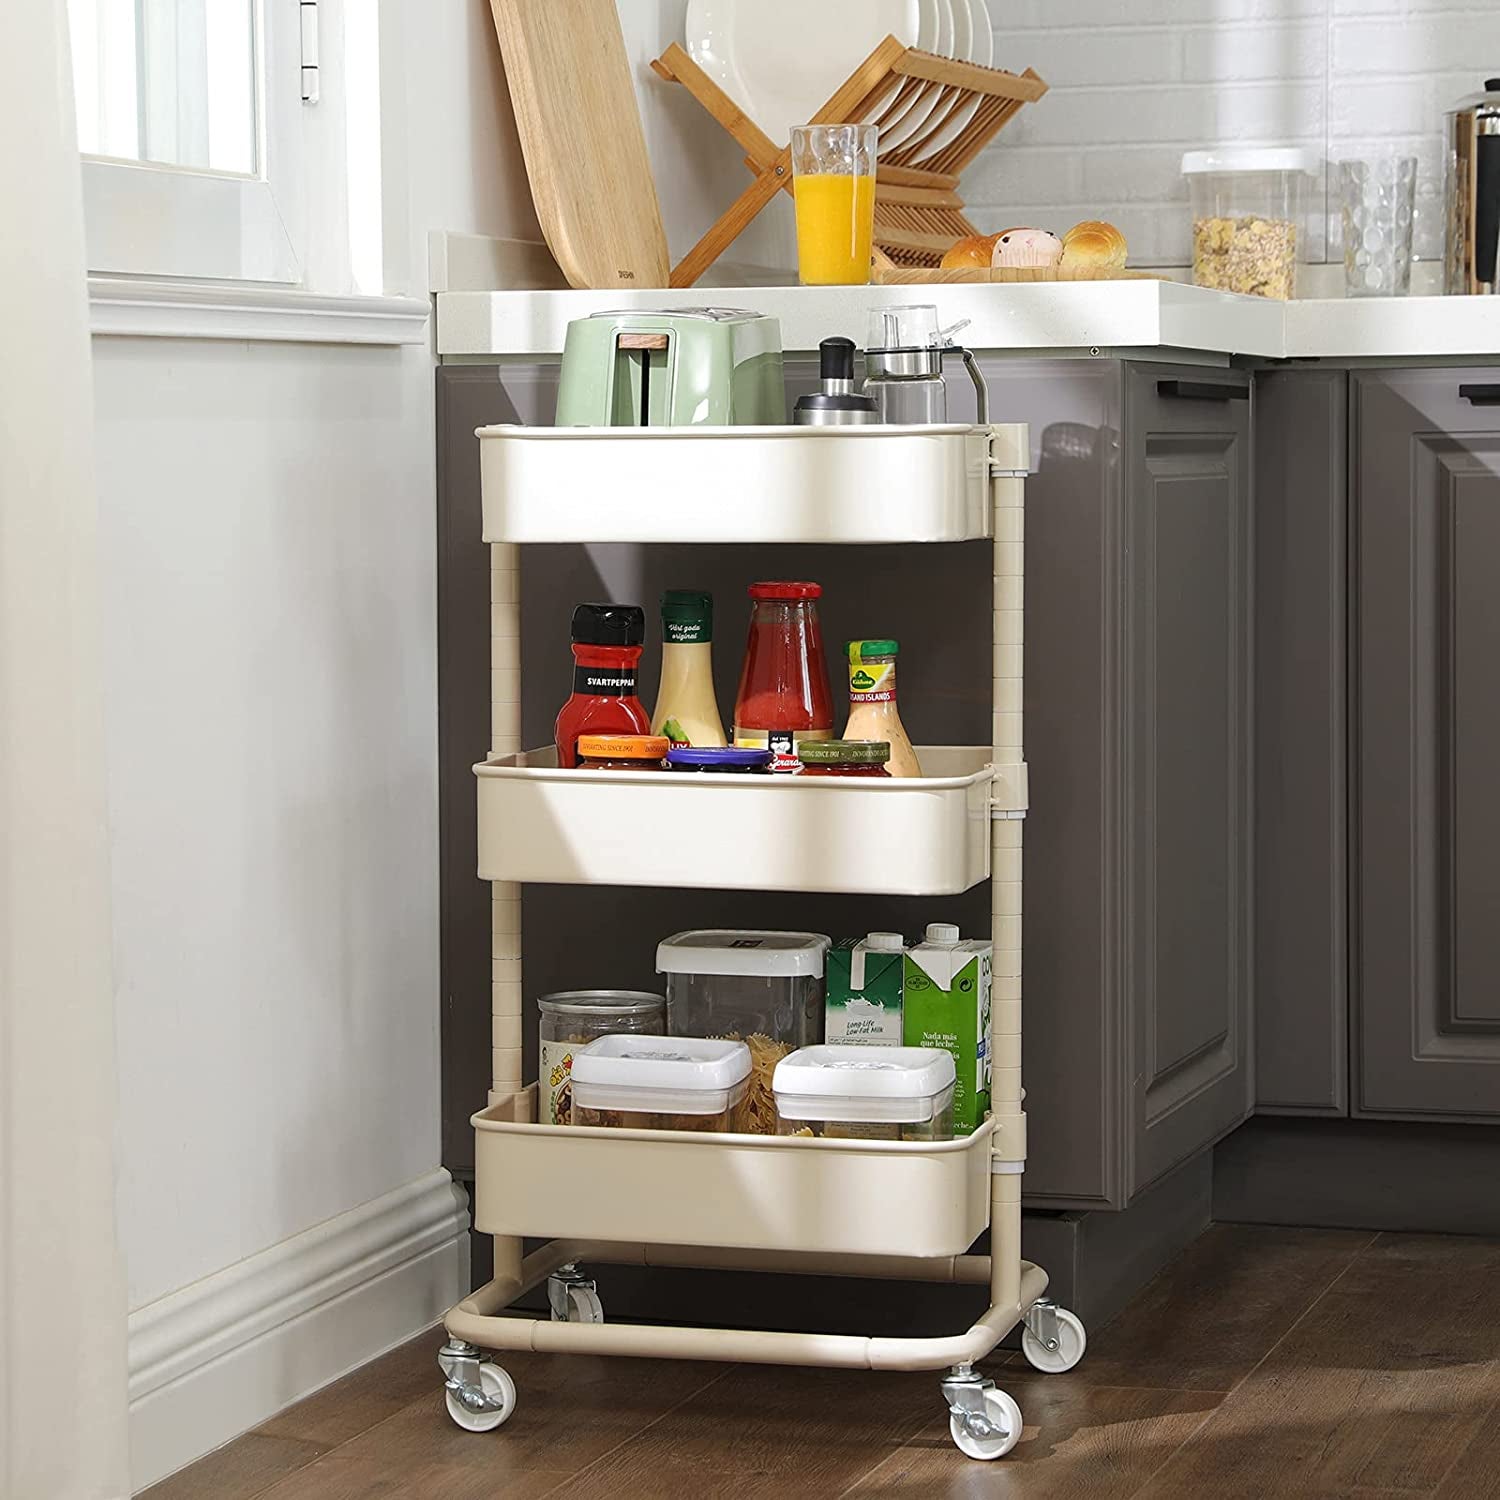 the white rolling cart holding condiments and storage containers